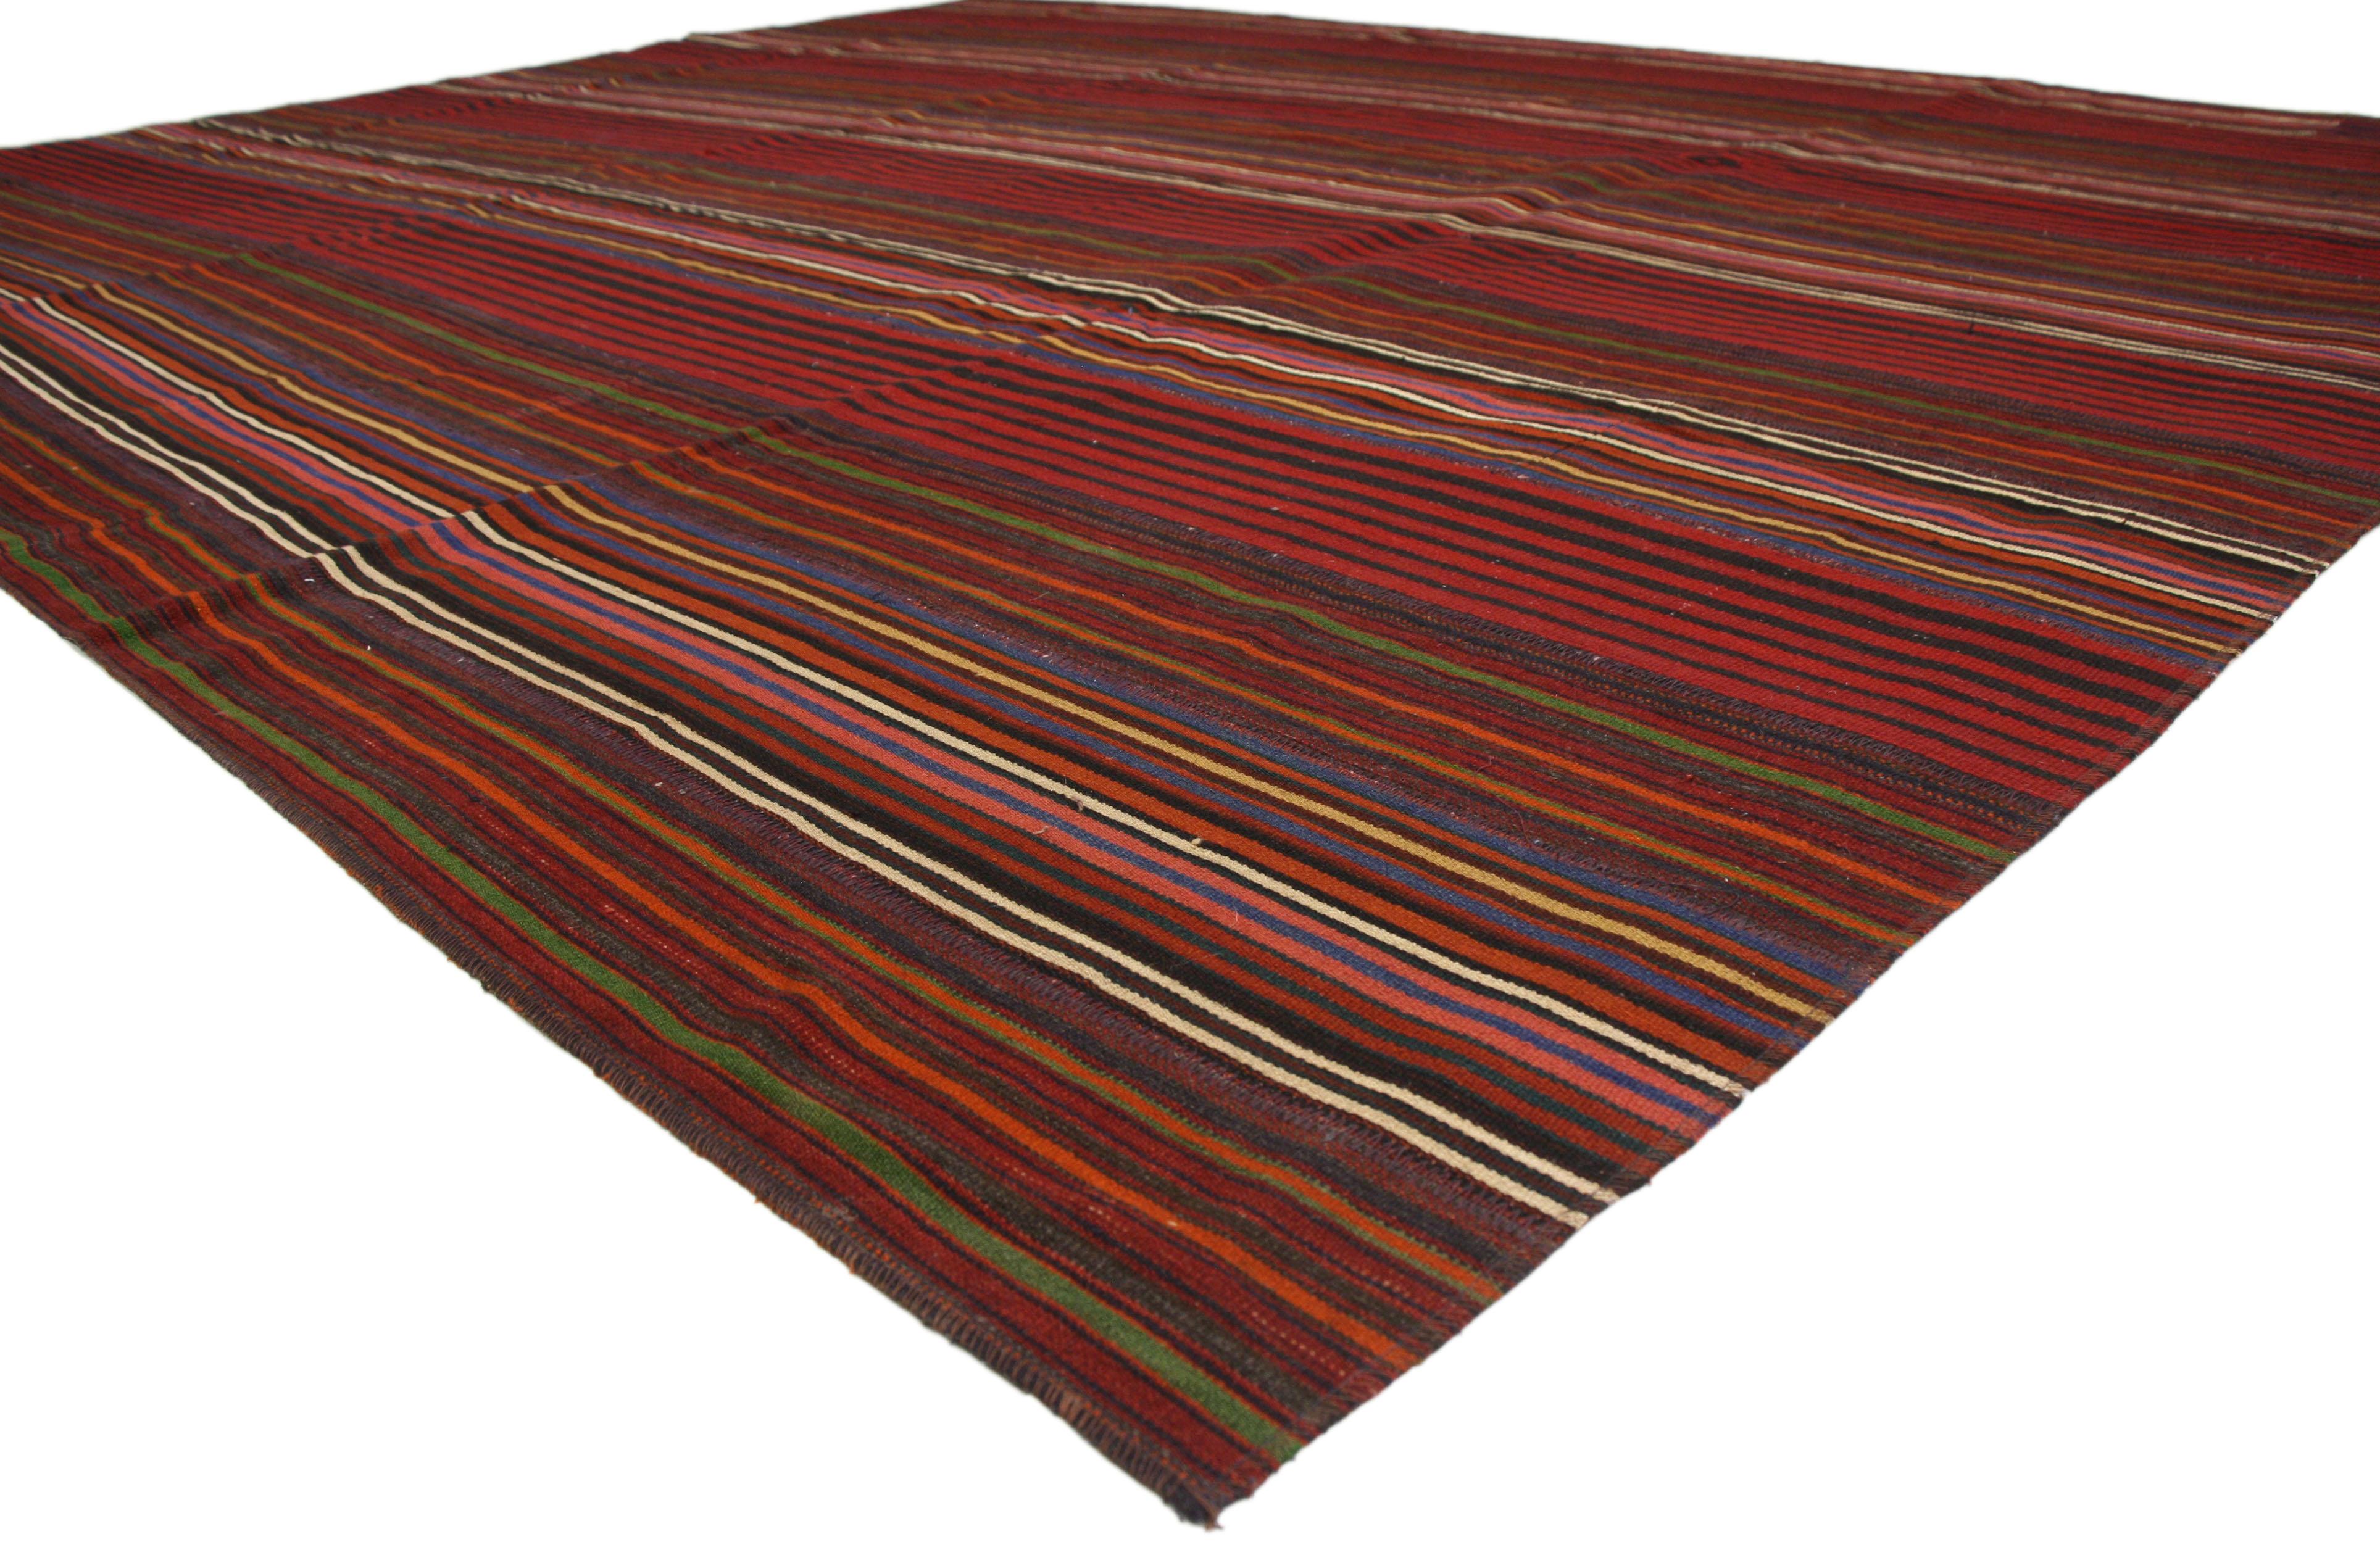 Hand-Woven Vintage Turkish Striped Kilim Rug with Modern Rustic Cabin Style For Sale